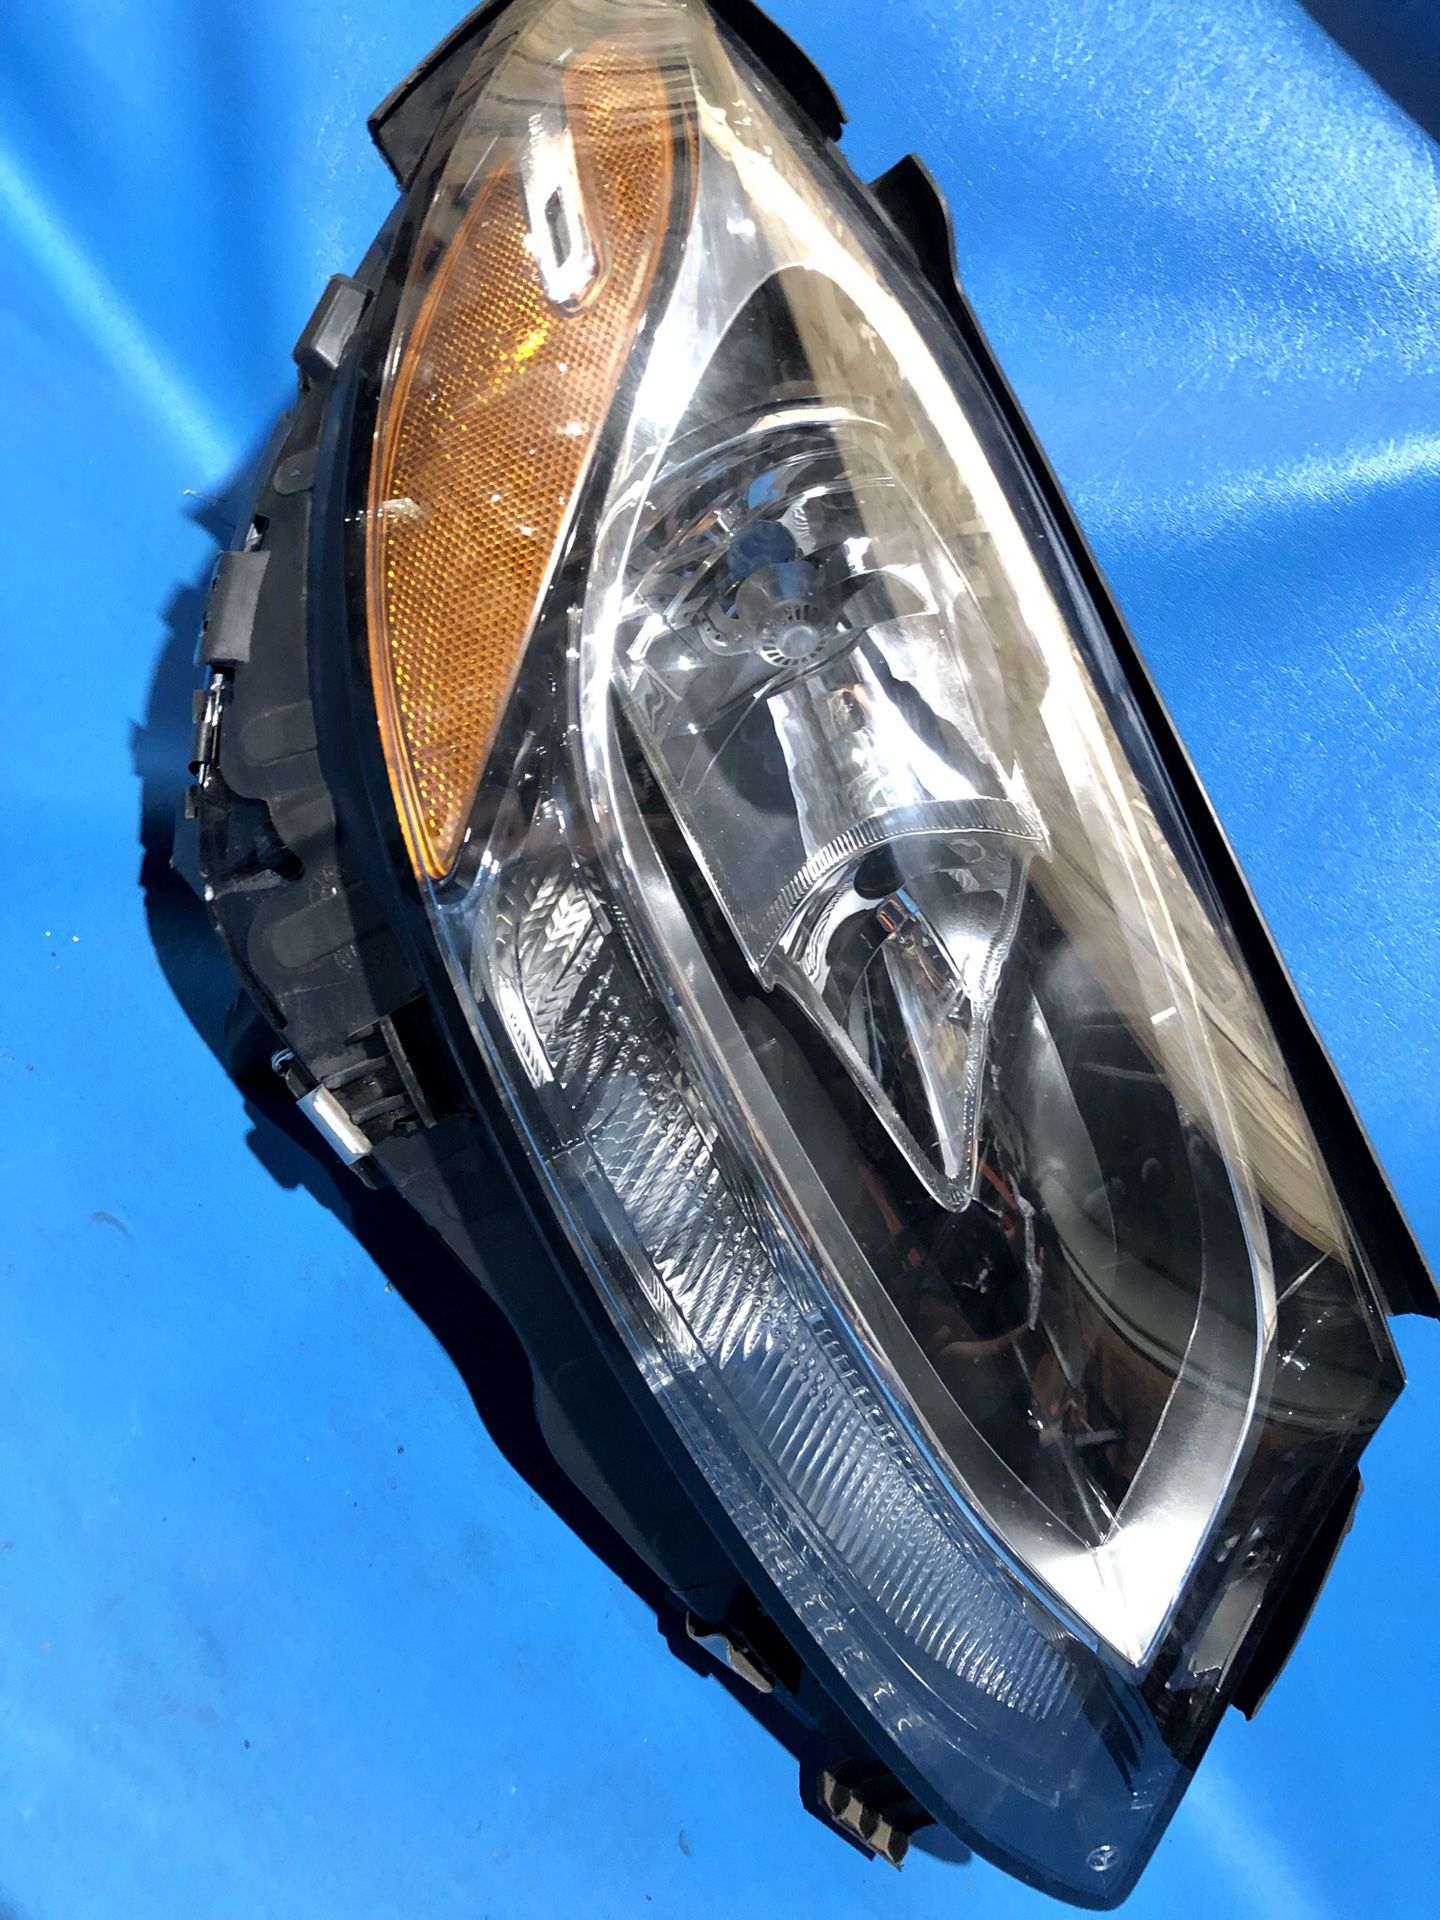 Mercedes Benz Right Headlight (P#{contact info removed})